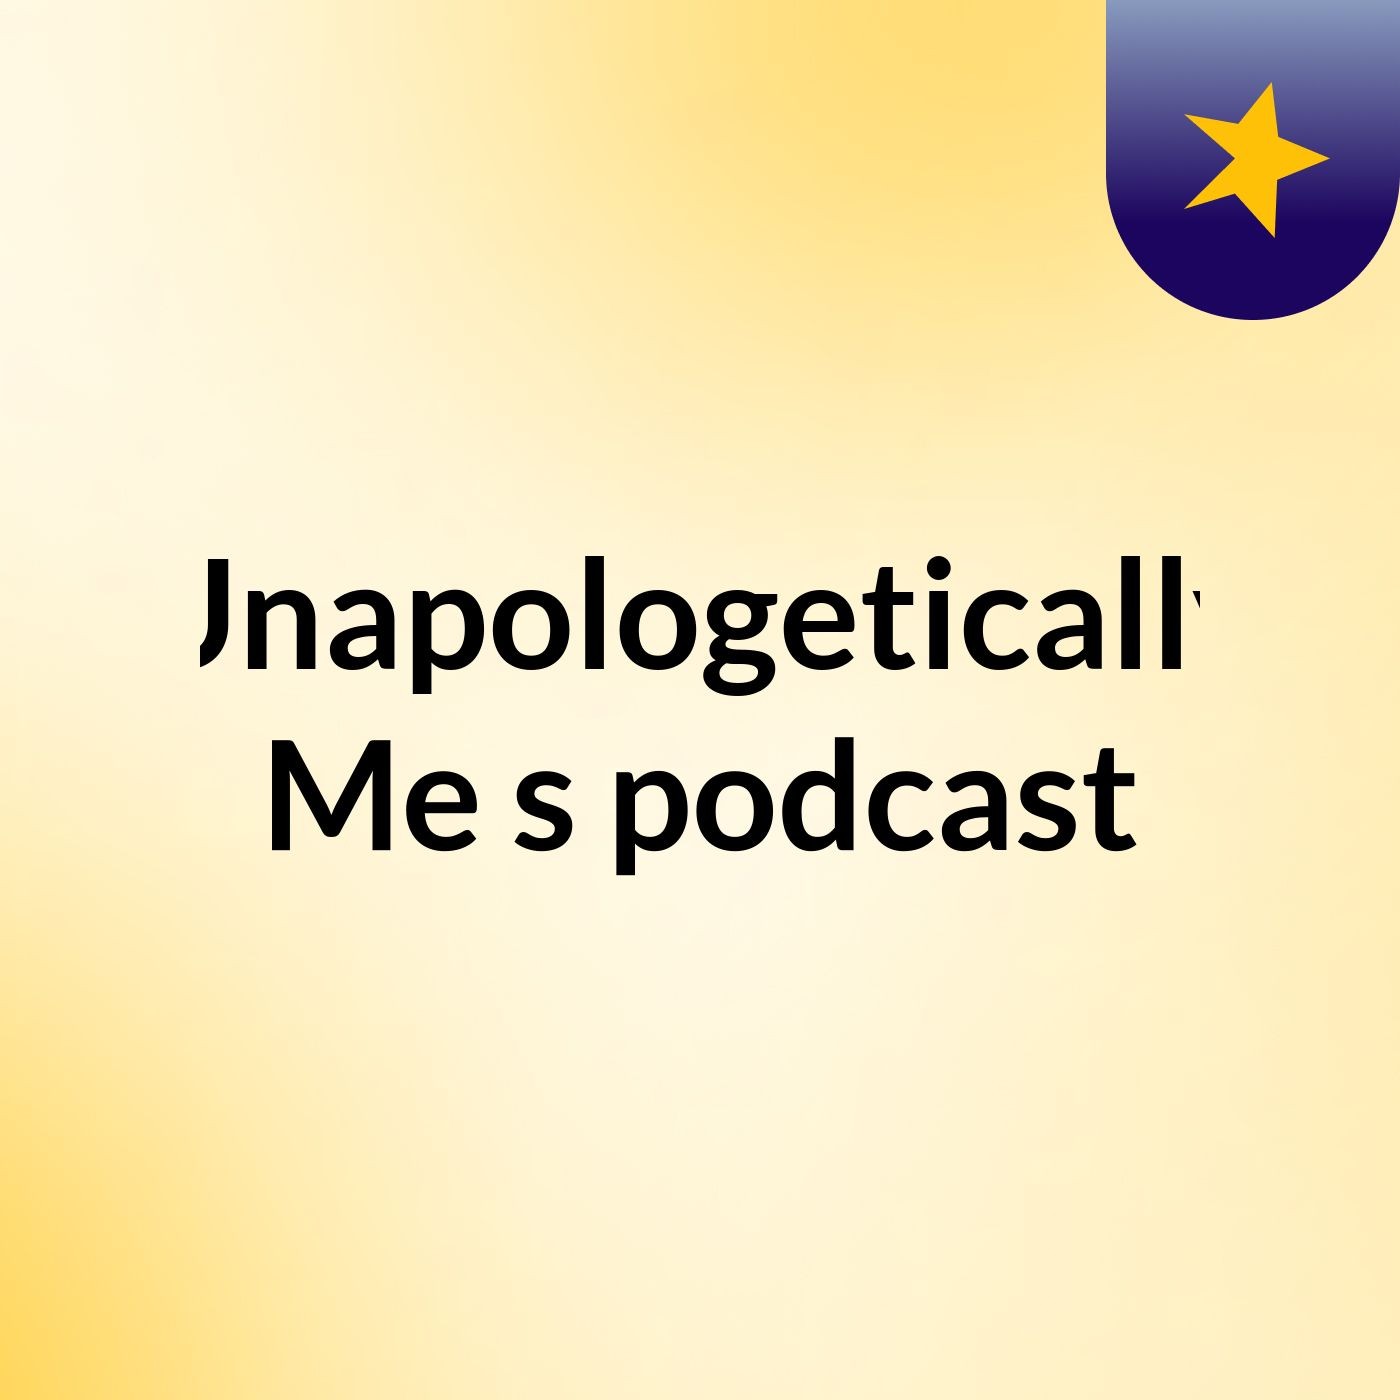 Unapologetically Me's podcast